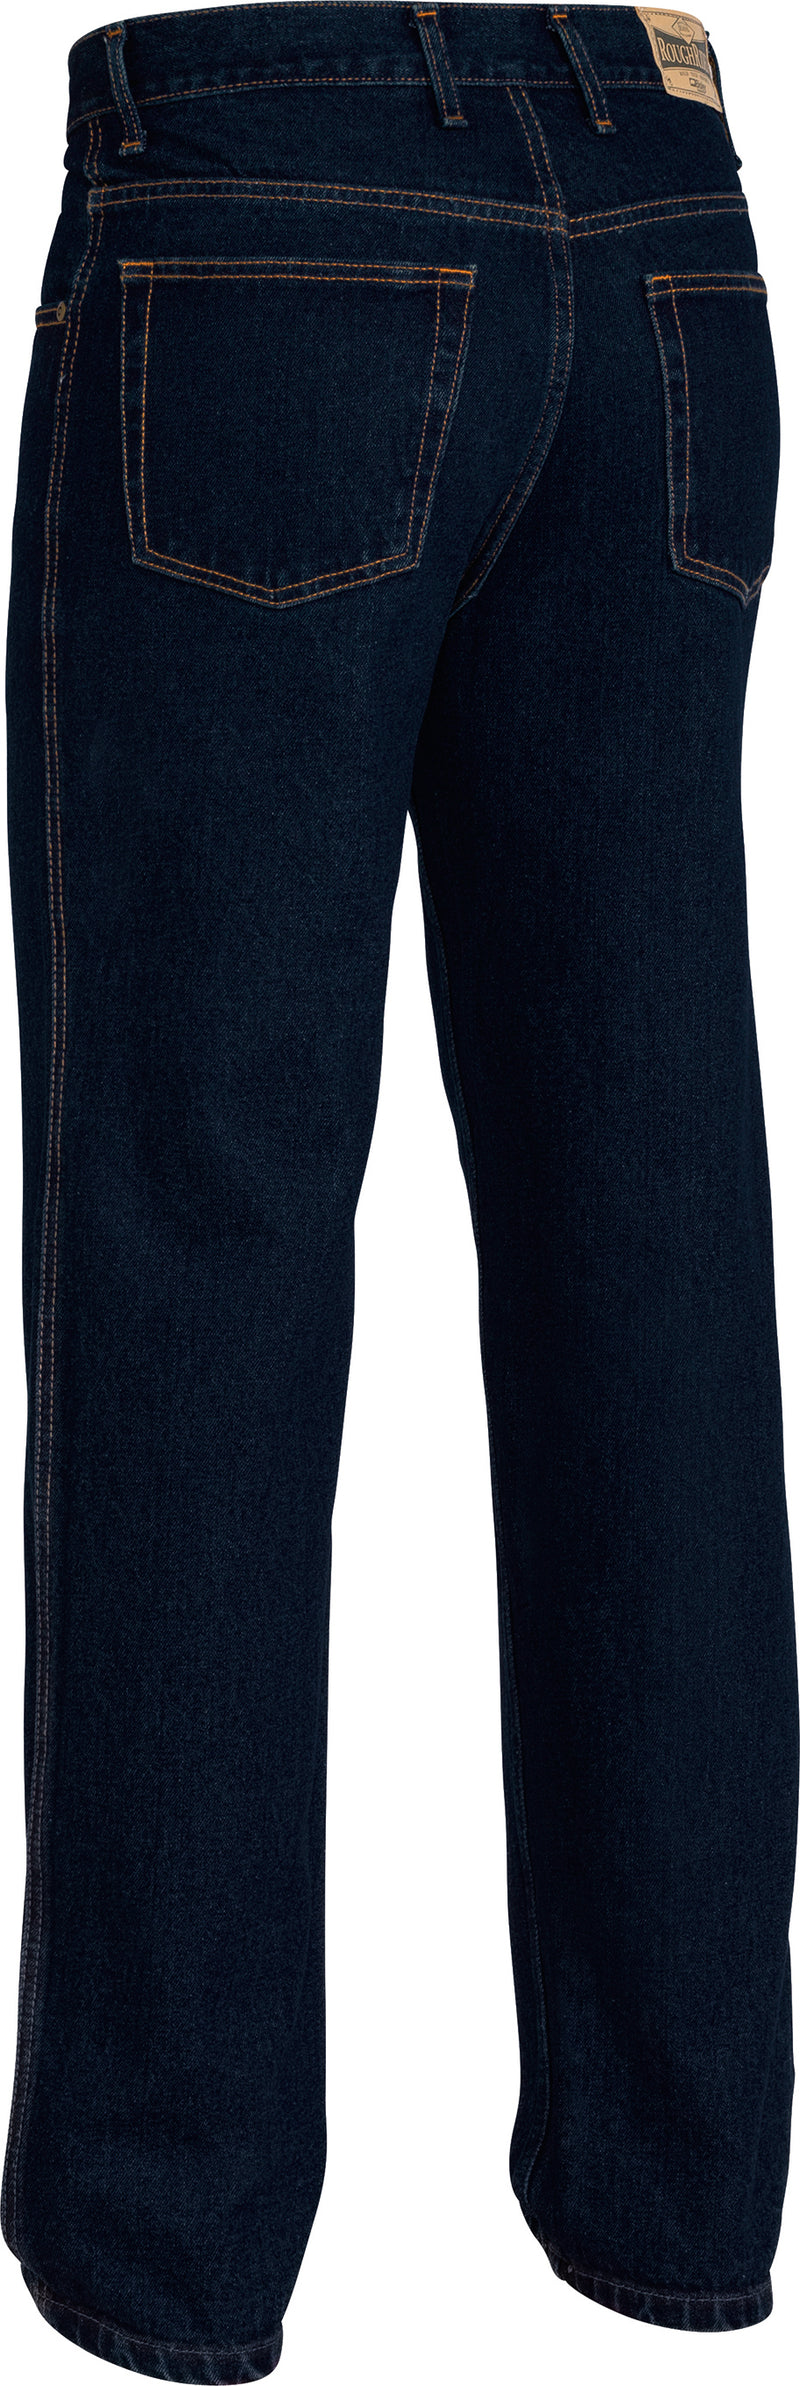 Load image into Gallery viewer, Wholesale BP6050 Bisley Rough Rider Denim Jeans - Stout Printed or Blank
